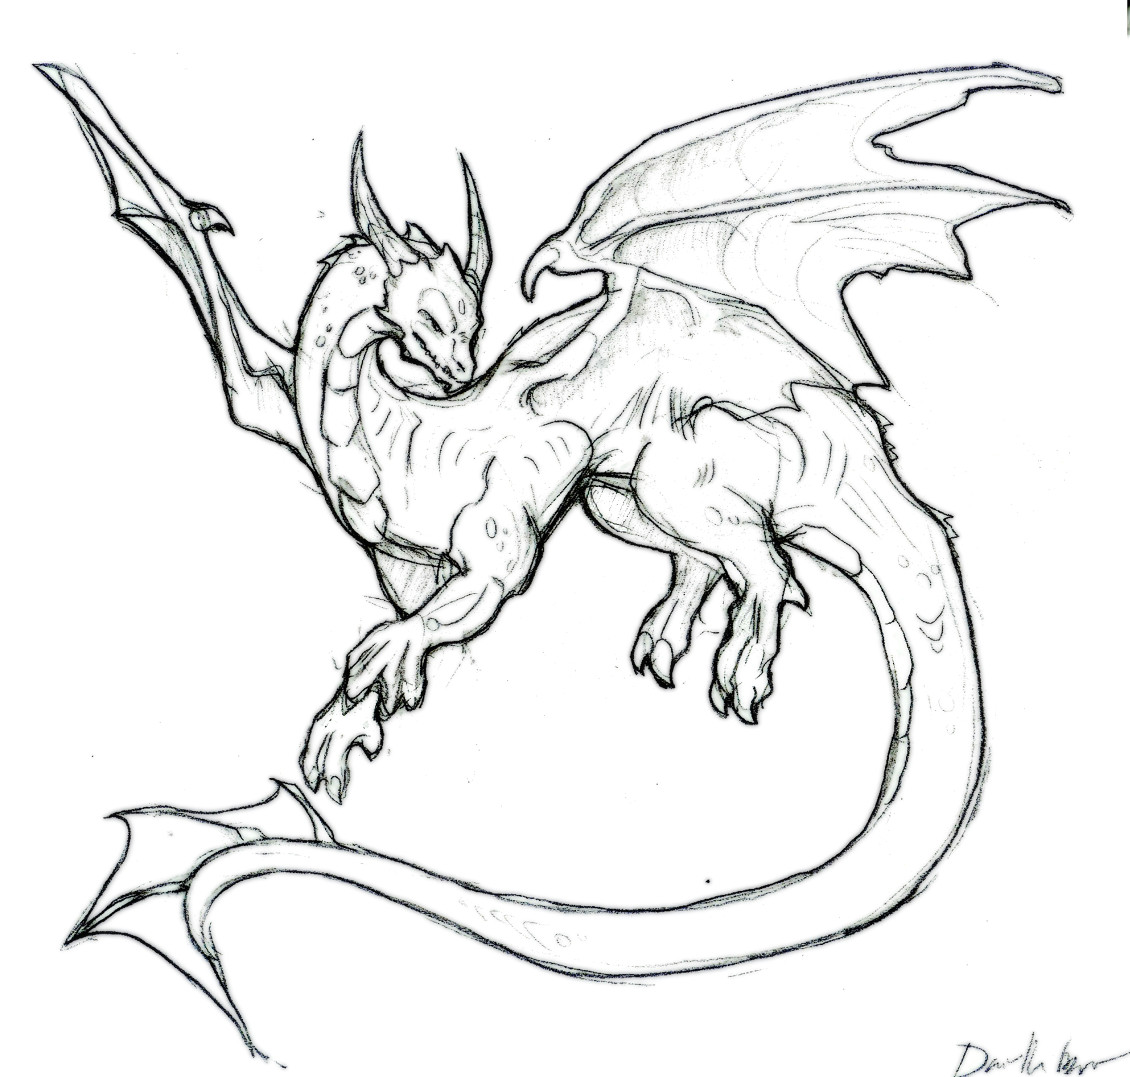 Black Line Drawings Of Dragons Line Drawing Dragon at Getdrawings Com Free for Personal Use Line